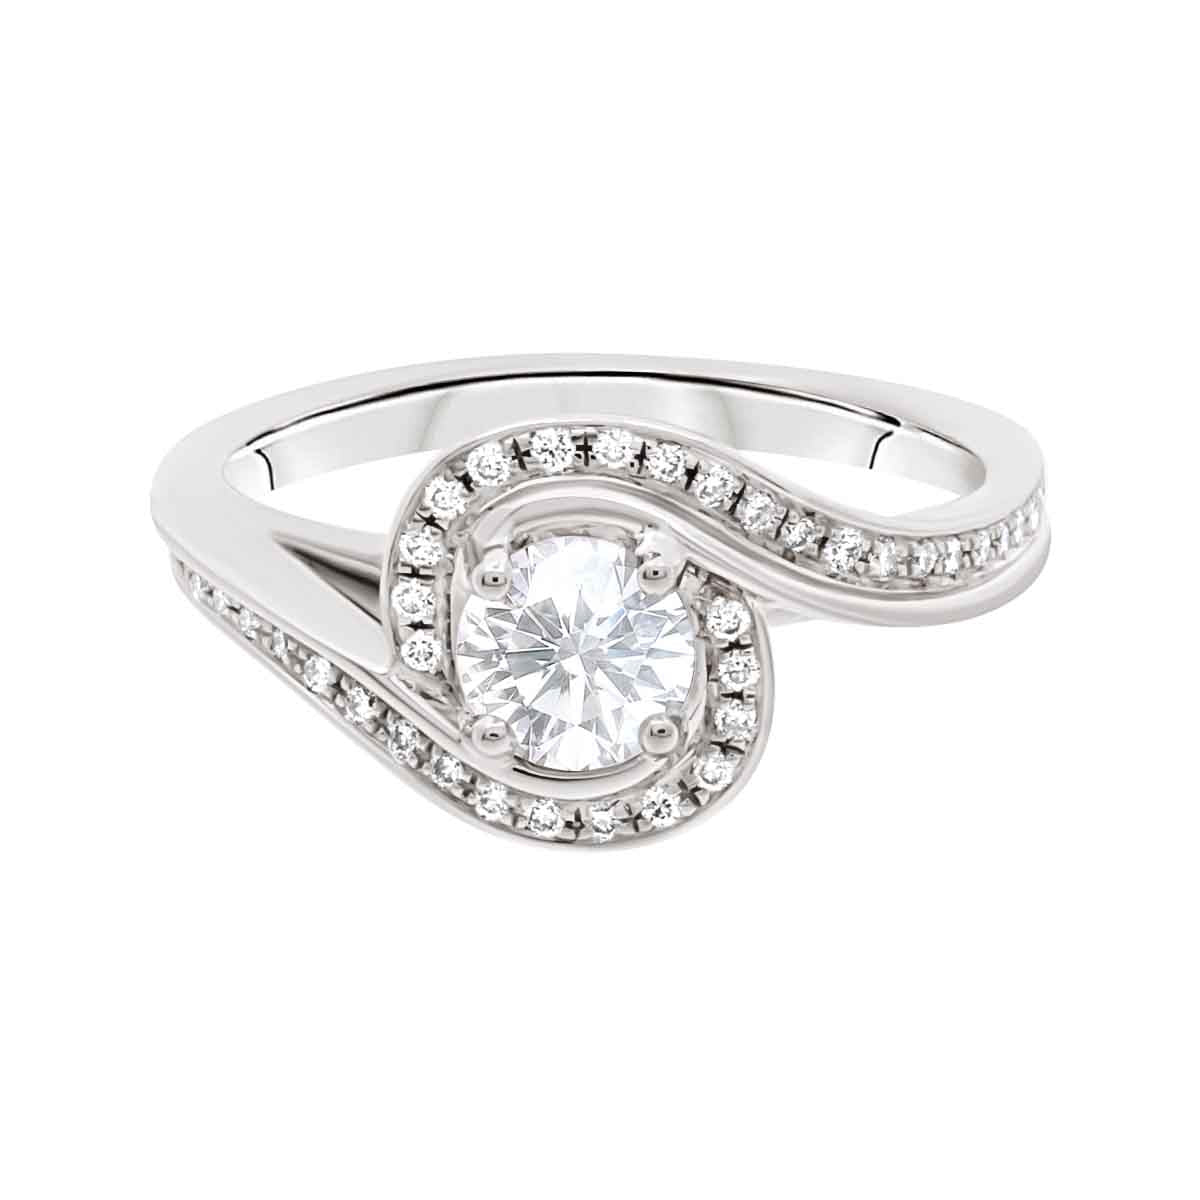 Contemporary Style Engagement Ring in white gold, lying flat, with a white background